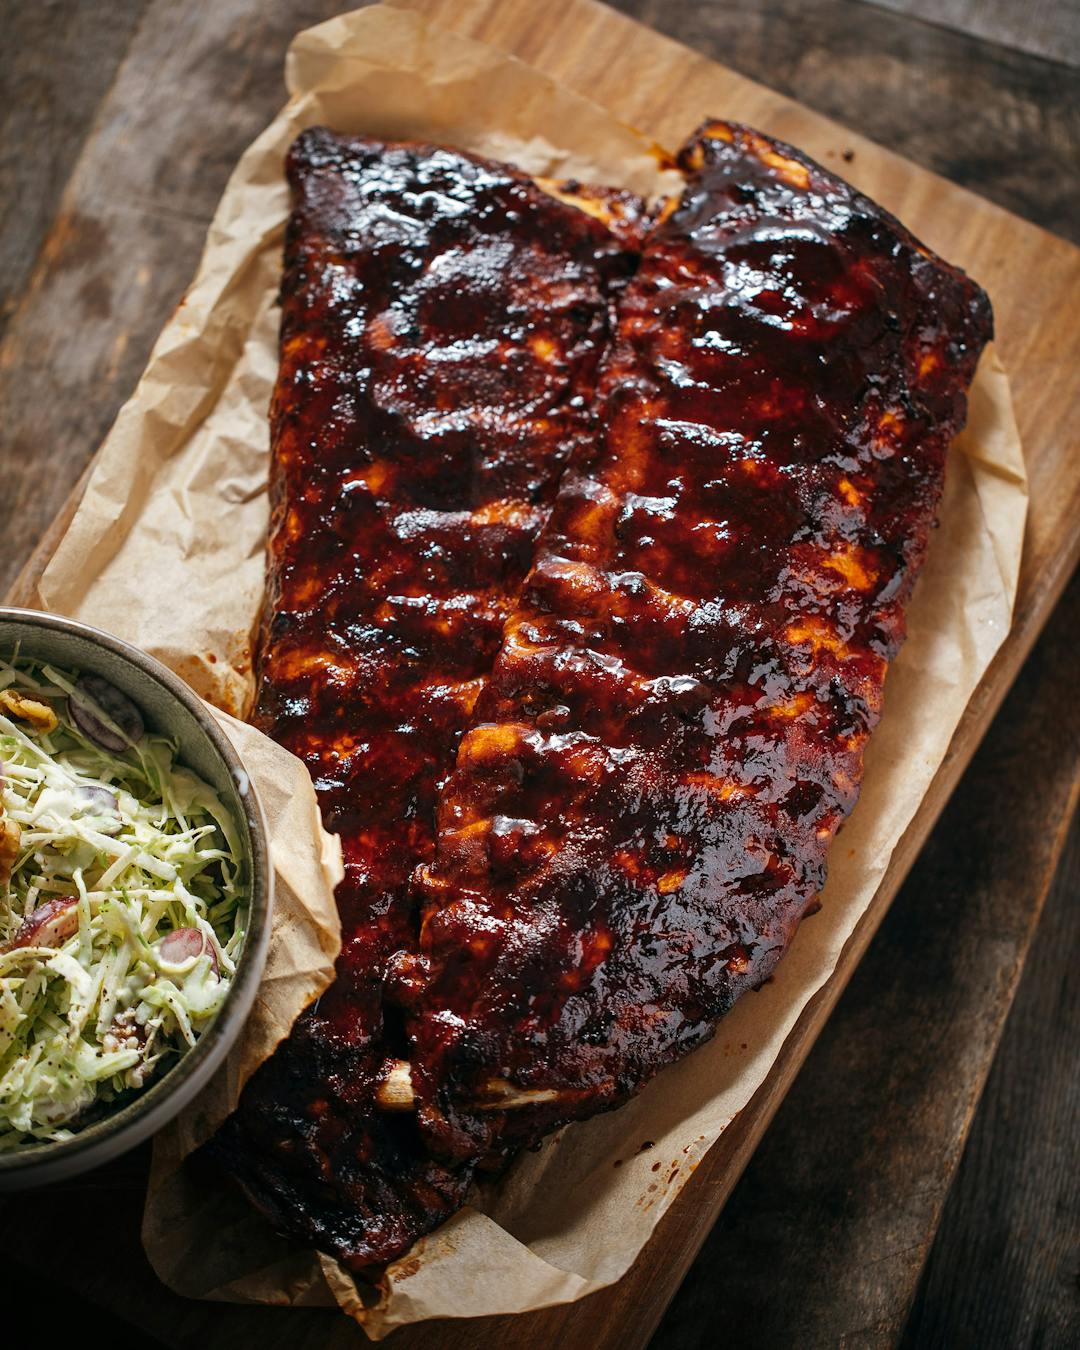 Cheat’s Ribs with homemade barbecue sauce